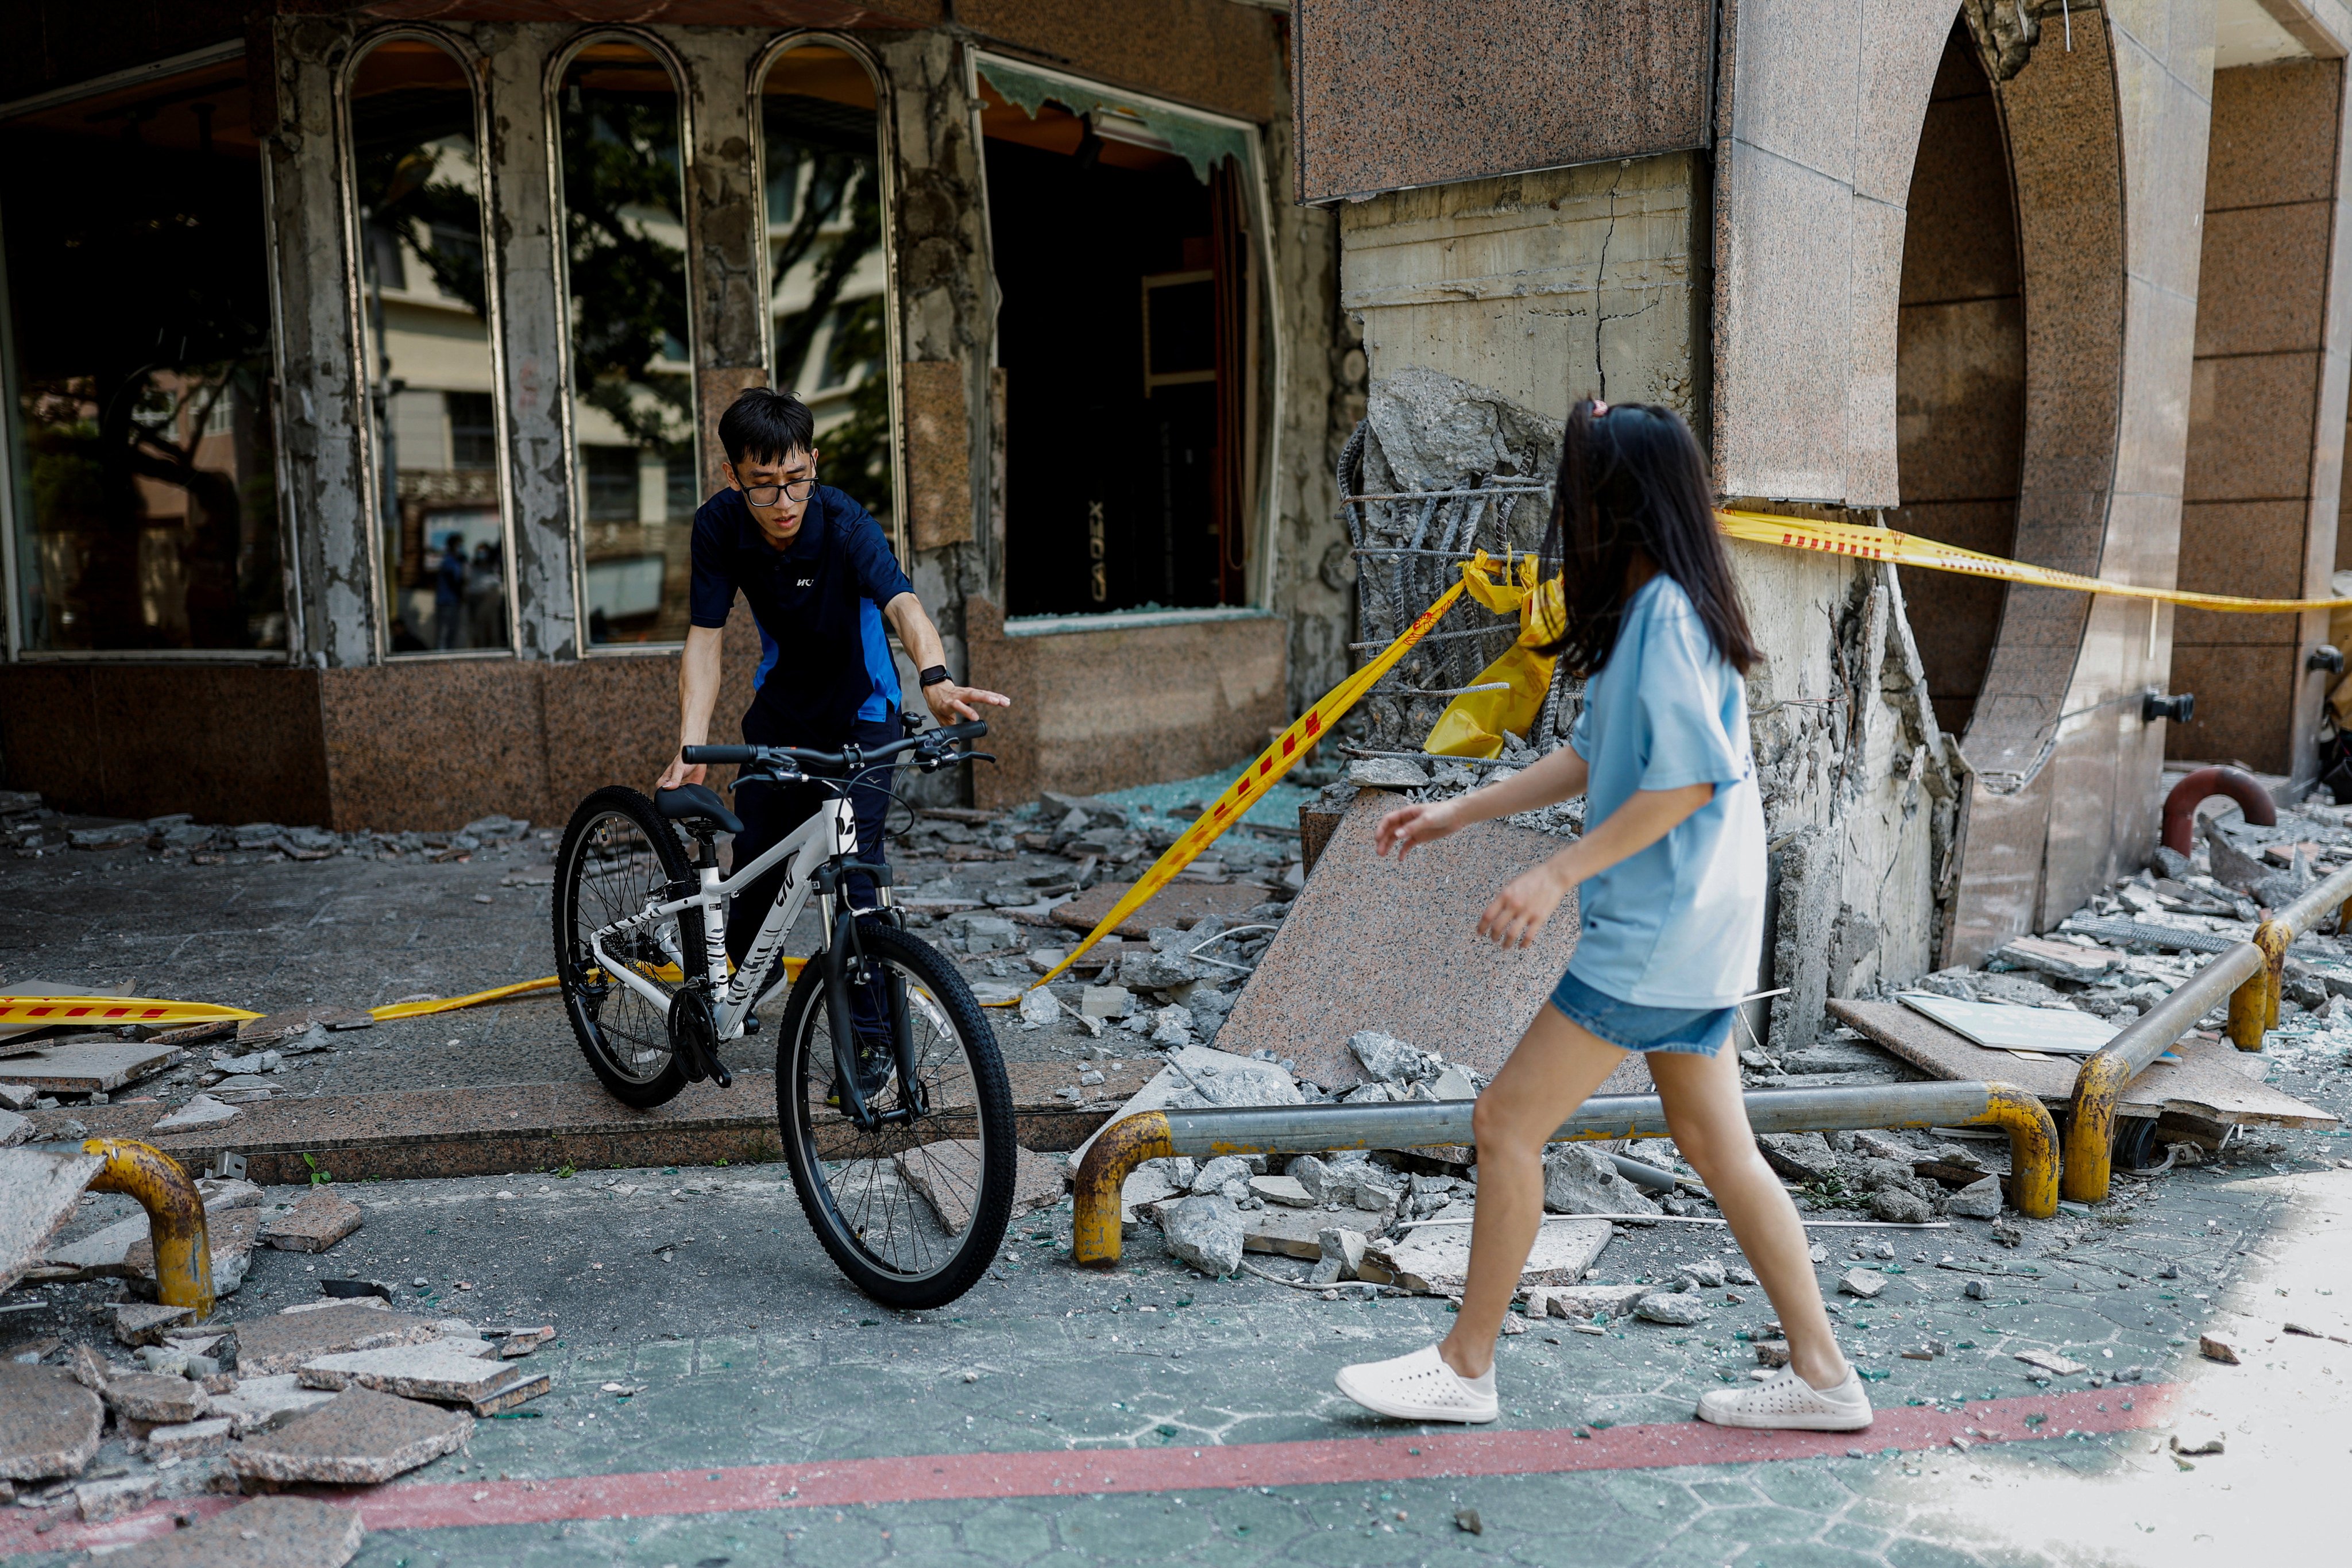 People move a bicycle from the rubble in Hualien. Photo: Reuters